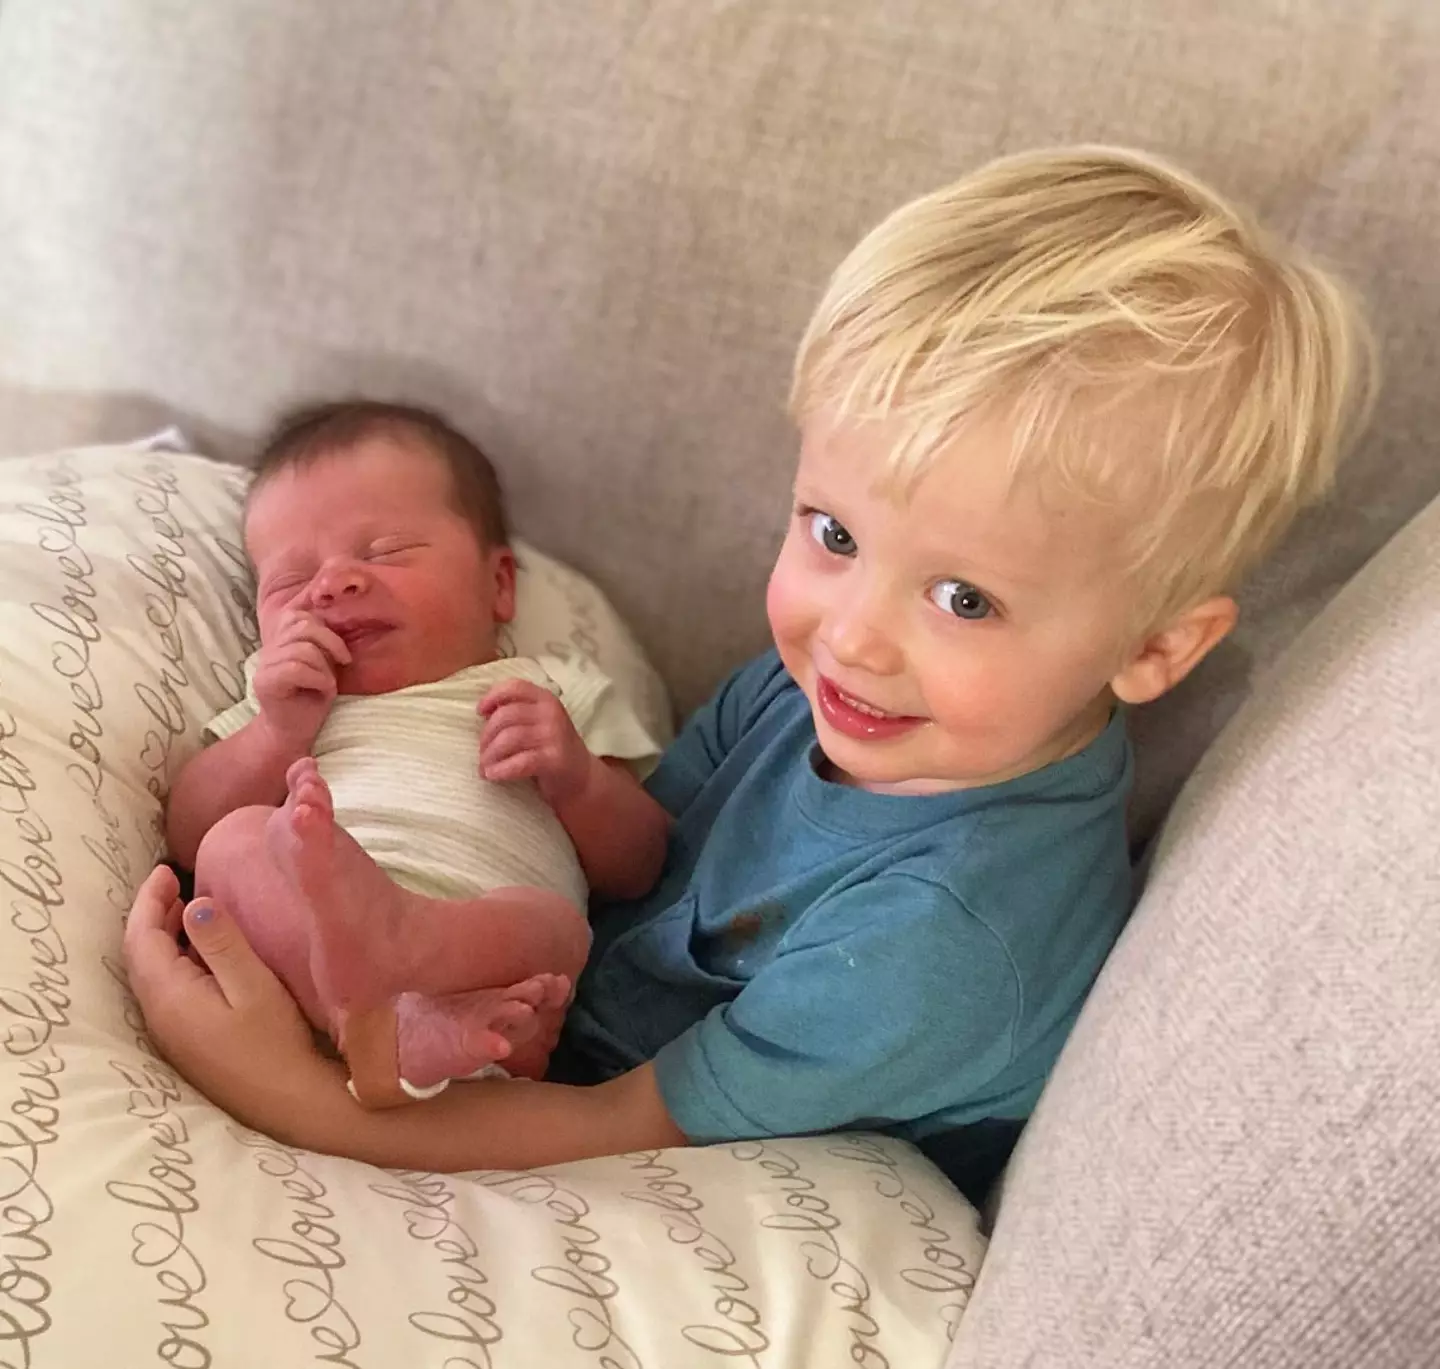 Cody’s wife Felicia shared an adorable photo of their new arrival with his older brother.